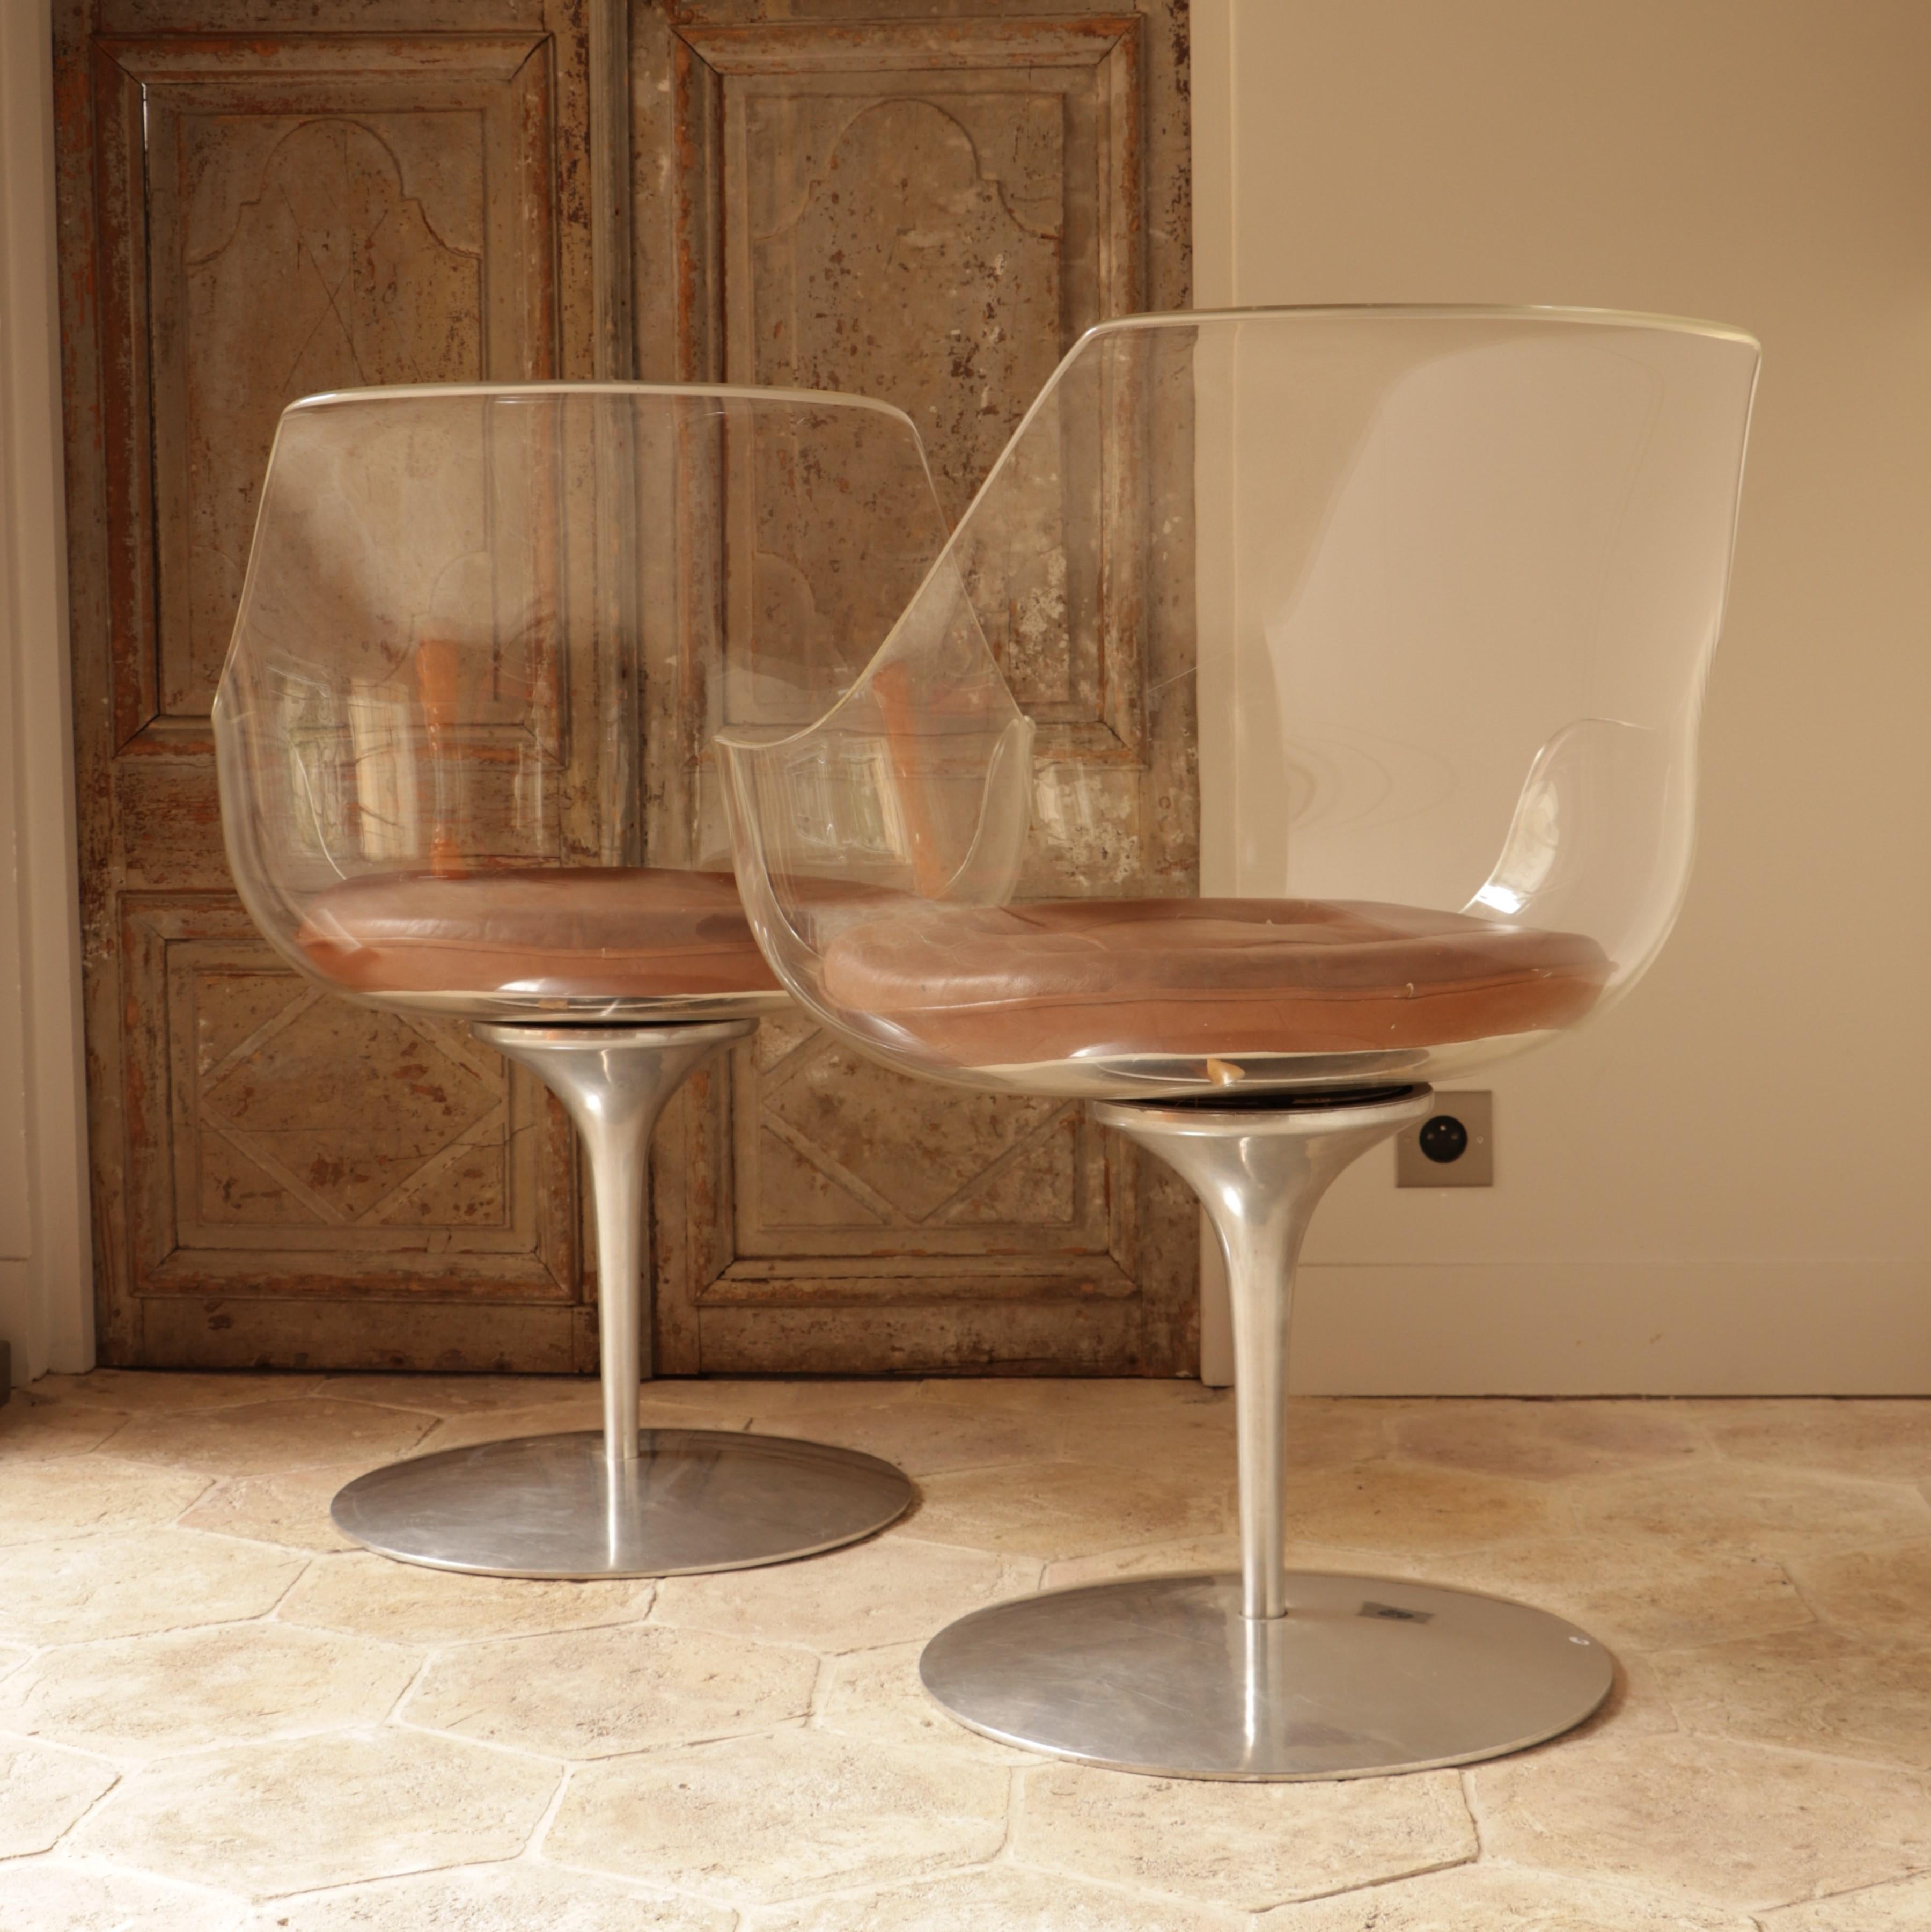 European Pair of Champagne Chairs, Estelle and Erwin Laverne